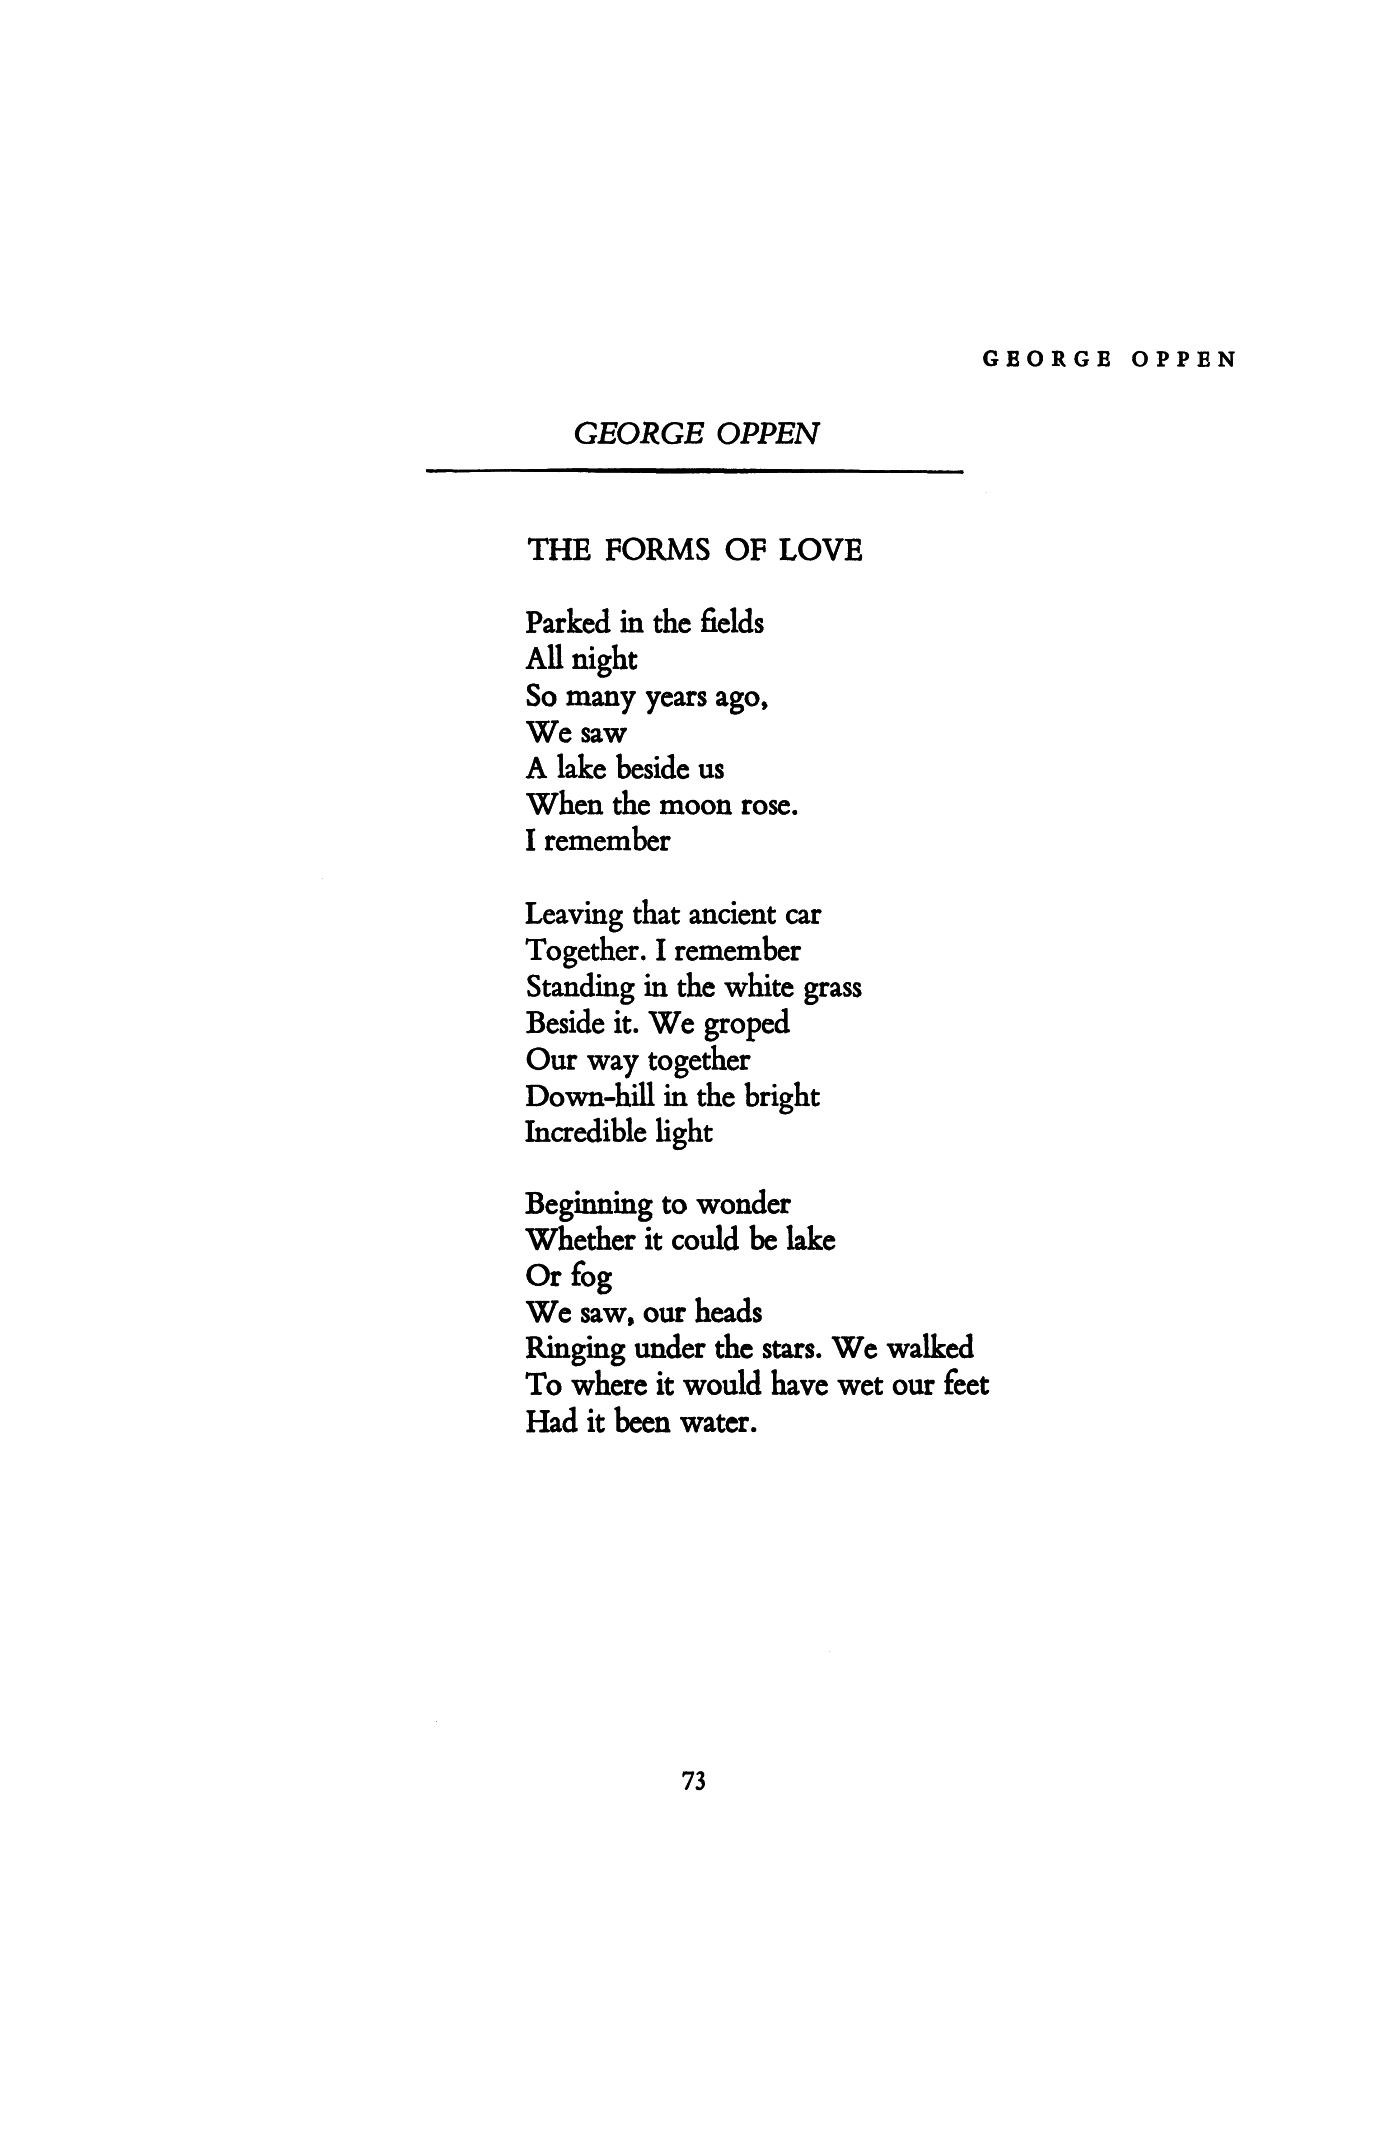 https://static.poetryfoundation.org/jstor/i20589715/pages/14.png